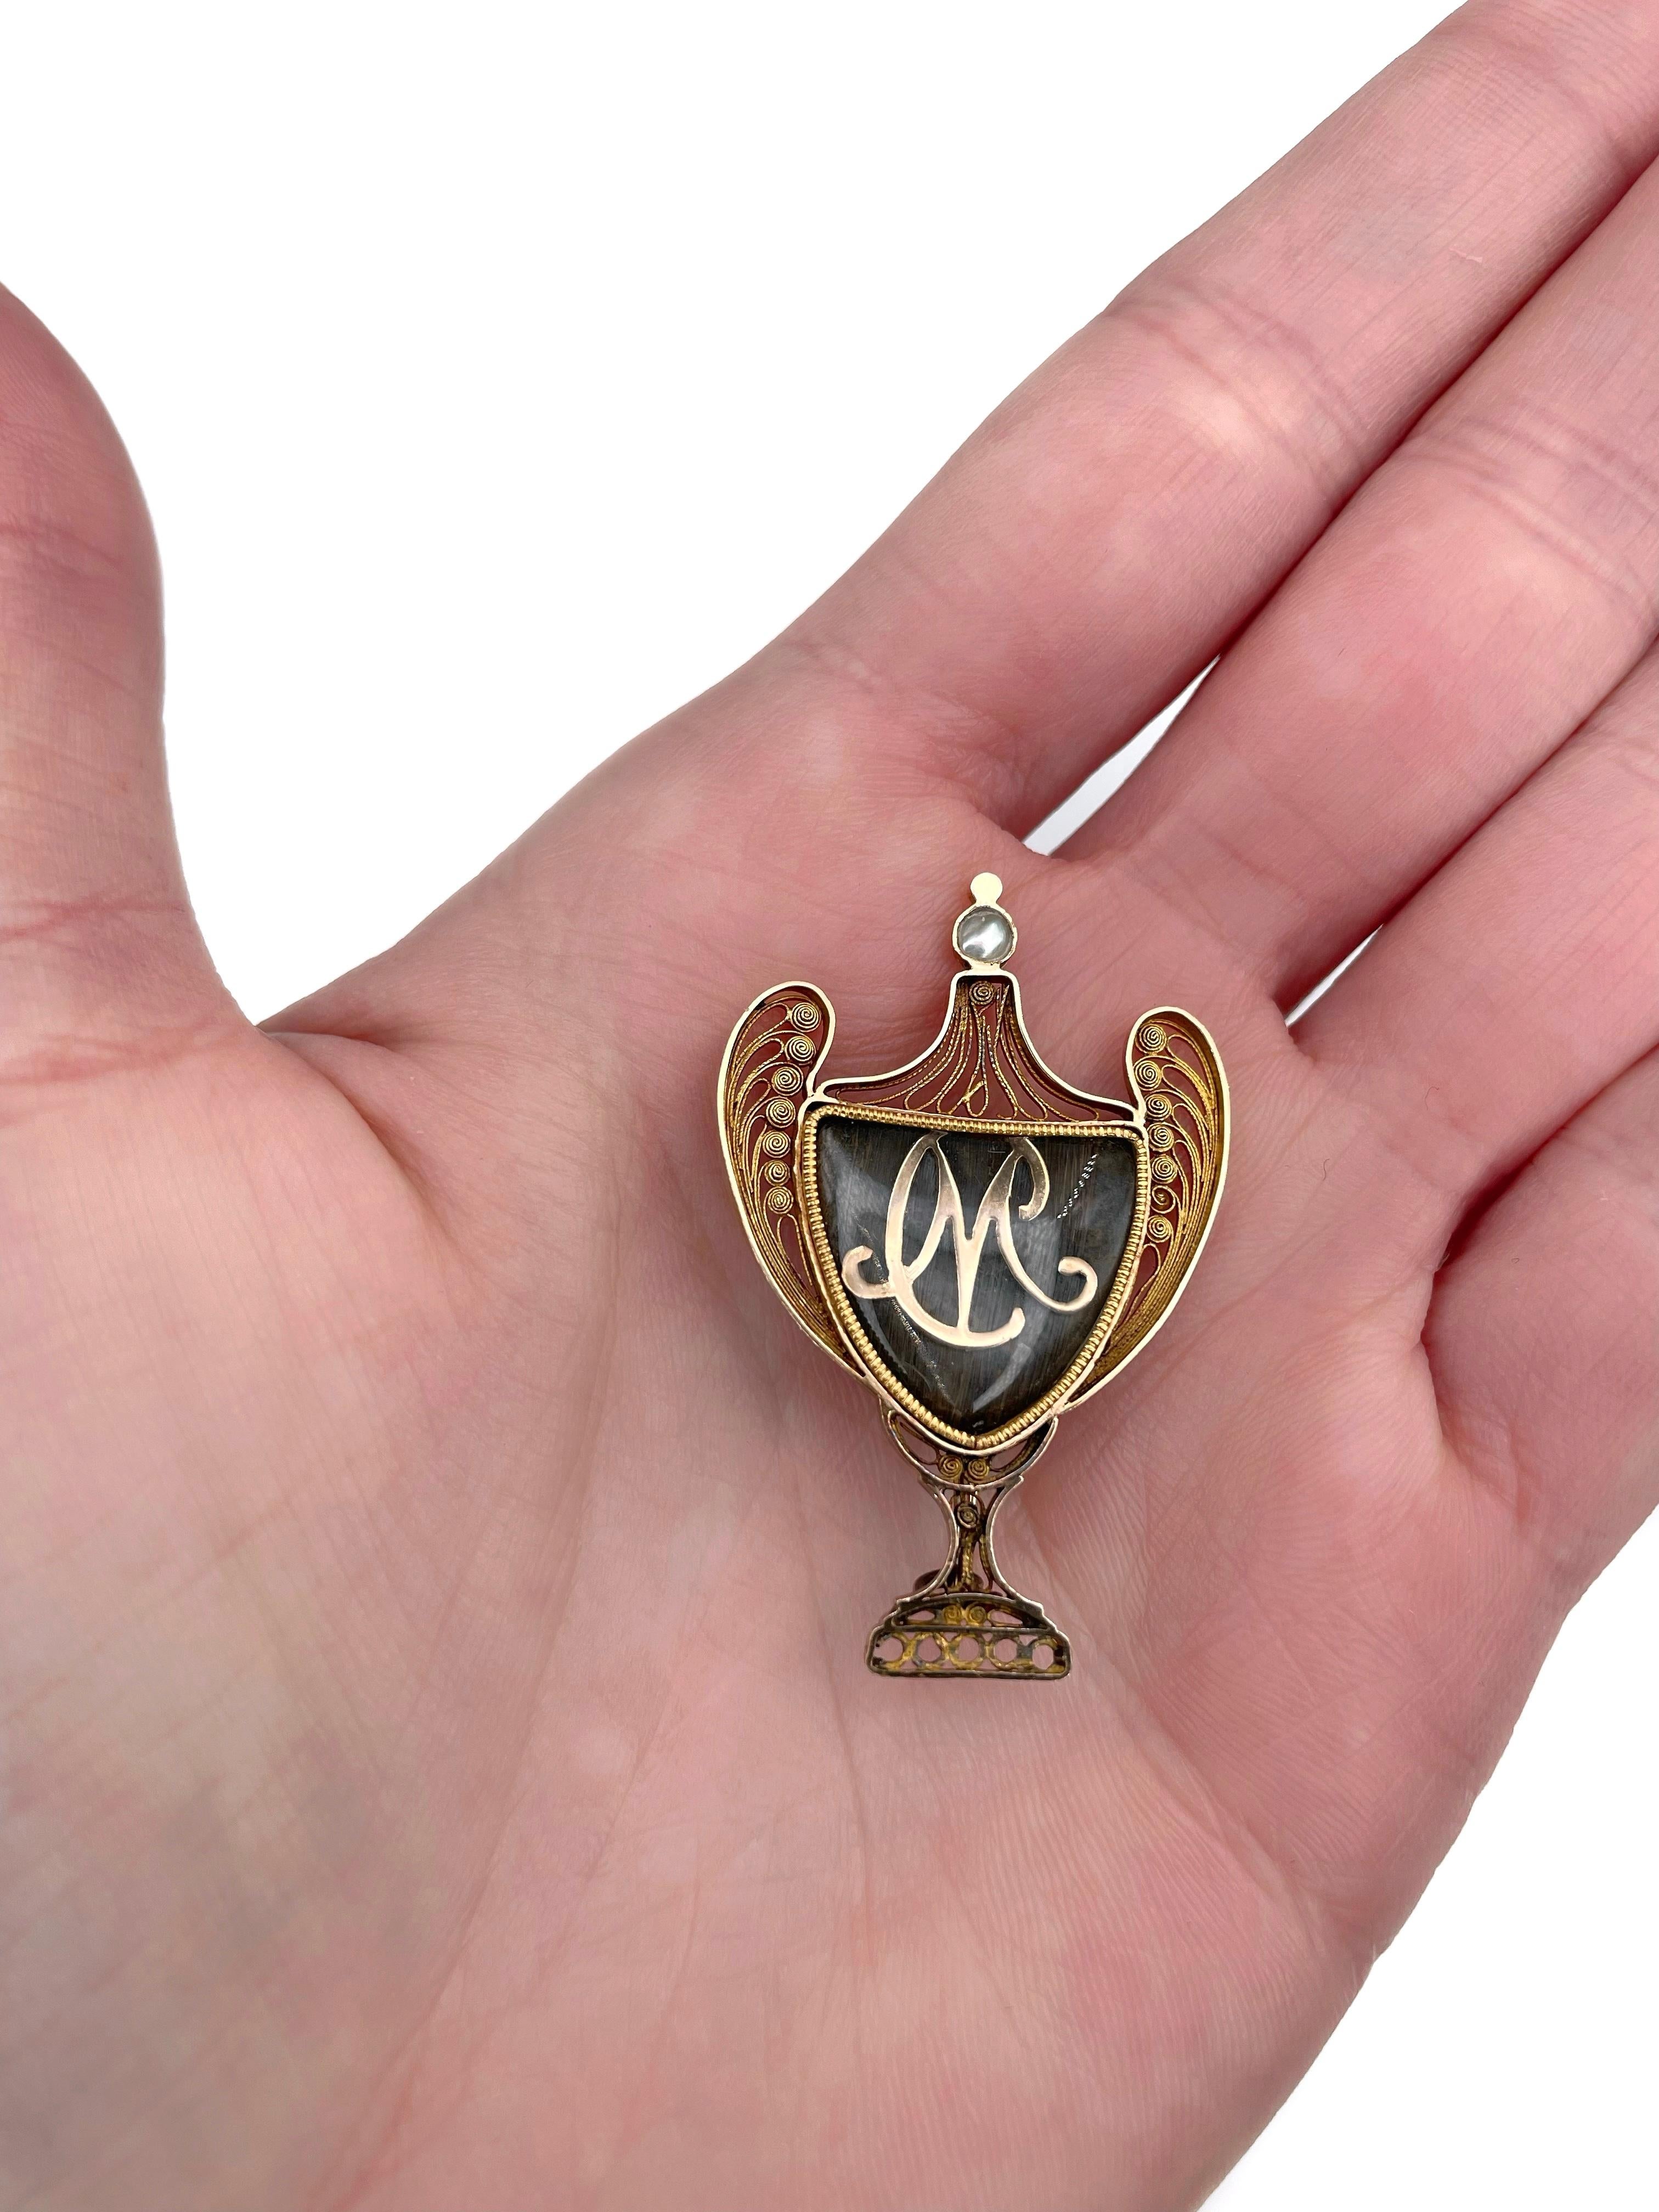 This is a Victorian mourning brooch with initials in a shape of the urn vase. It is crafted in 18K gold using a filigree technique. Circa 1880.

The piece features a hairwork (covered with the glass). The top is encrusted with a pearl.

This is an